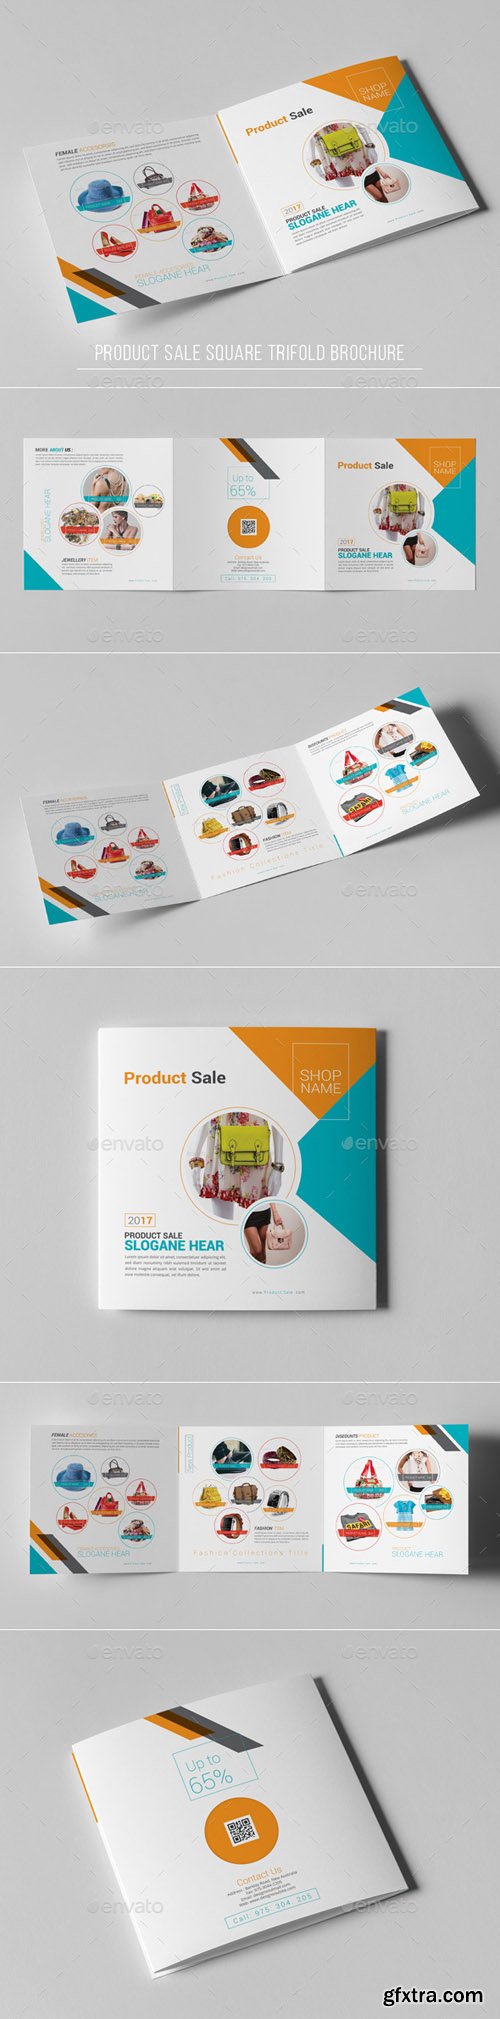 GR - Product Sale Square Trifold Brochure 19307235